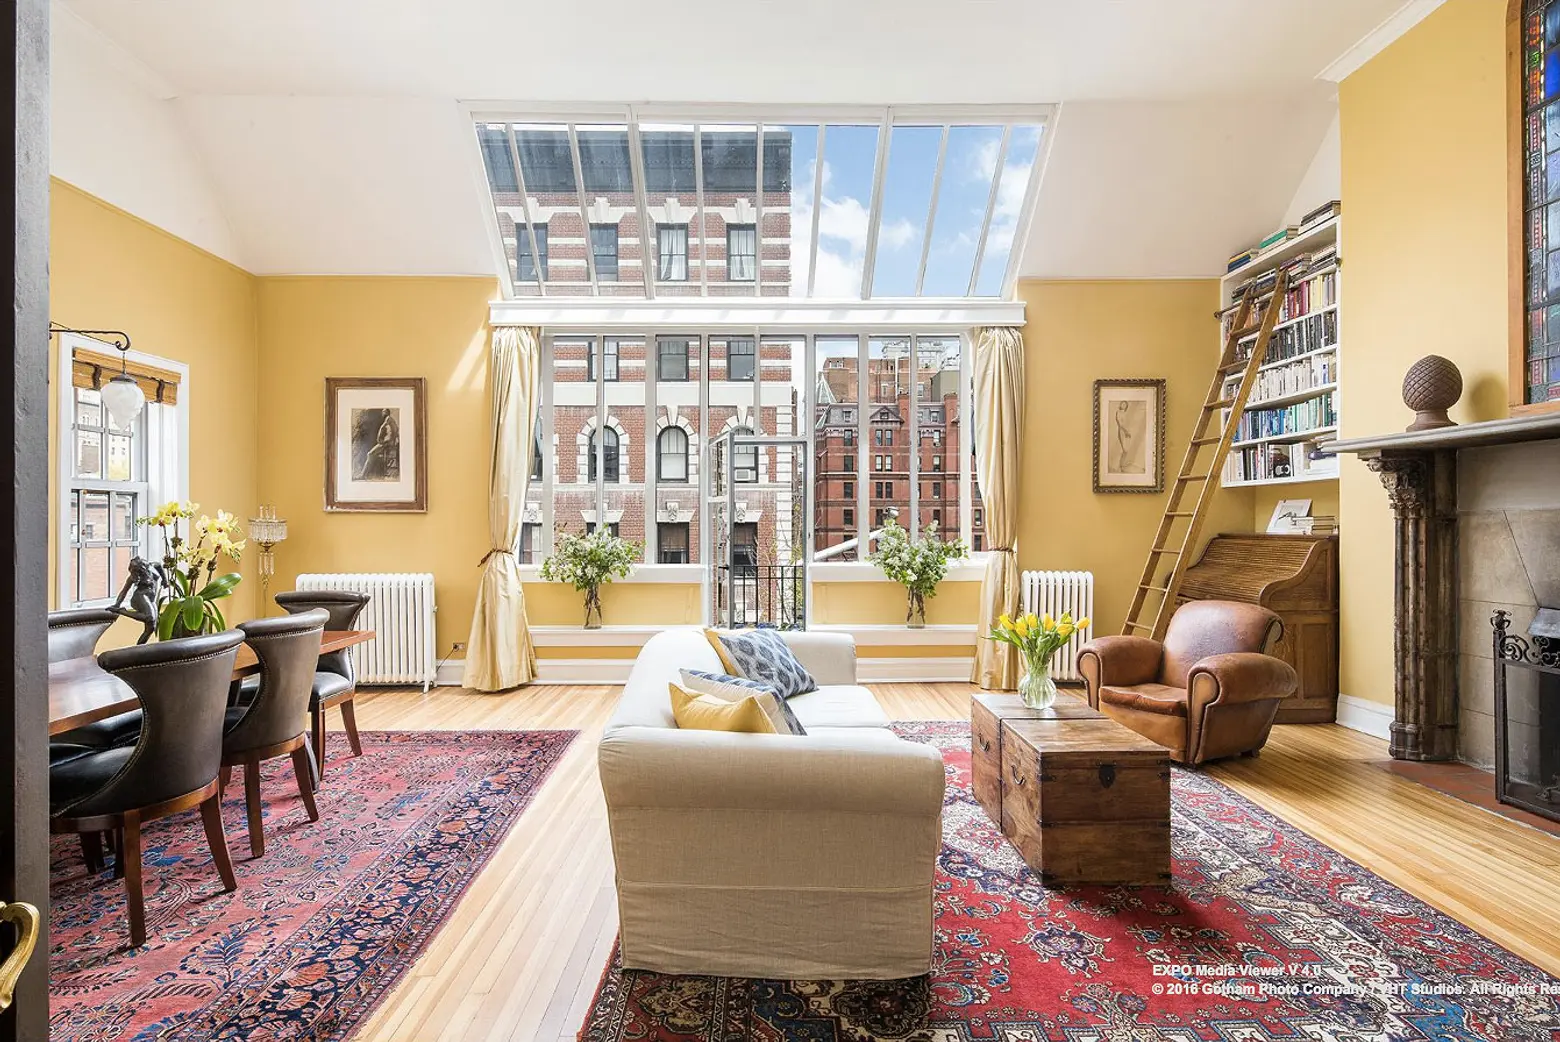 Rare and Spectacular Light-Filled Penthouse Overlooking Gramercy Park Asks $2.5M